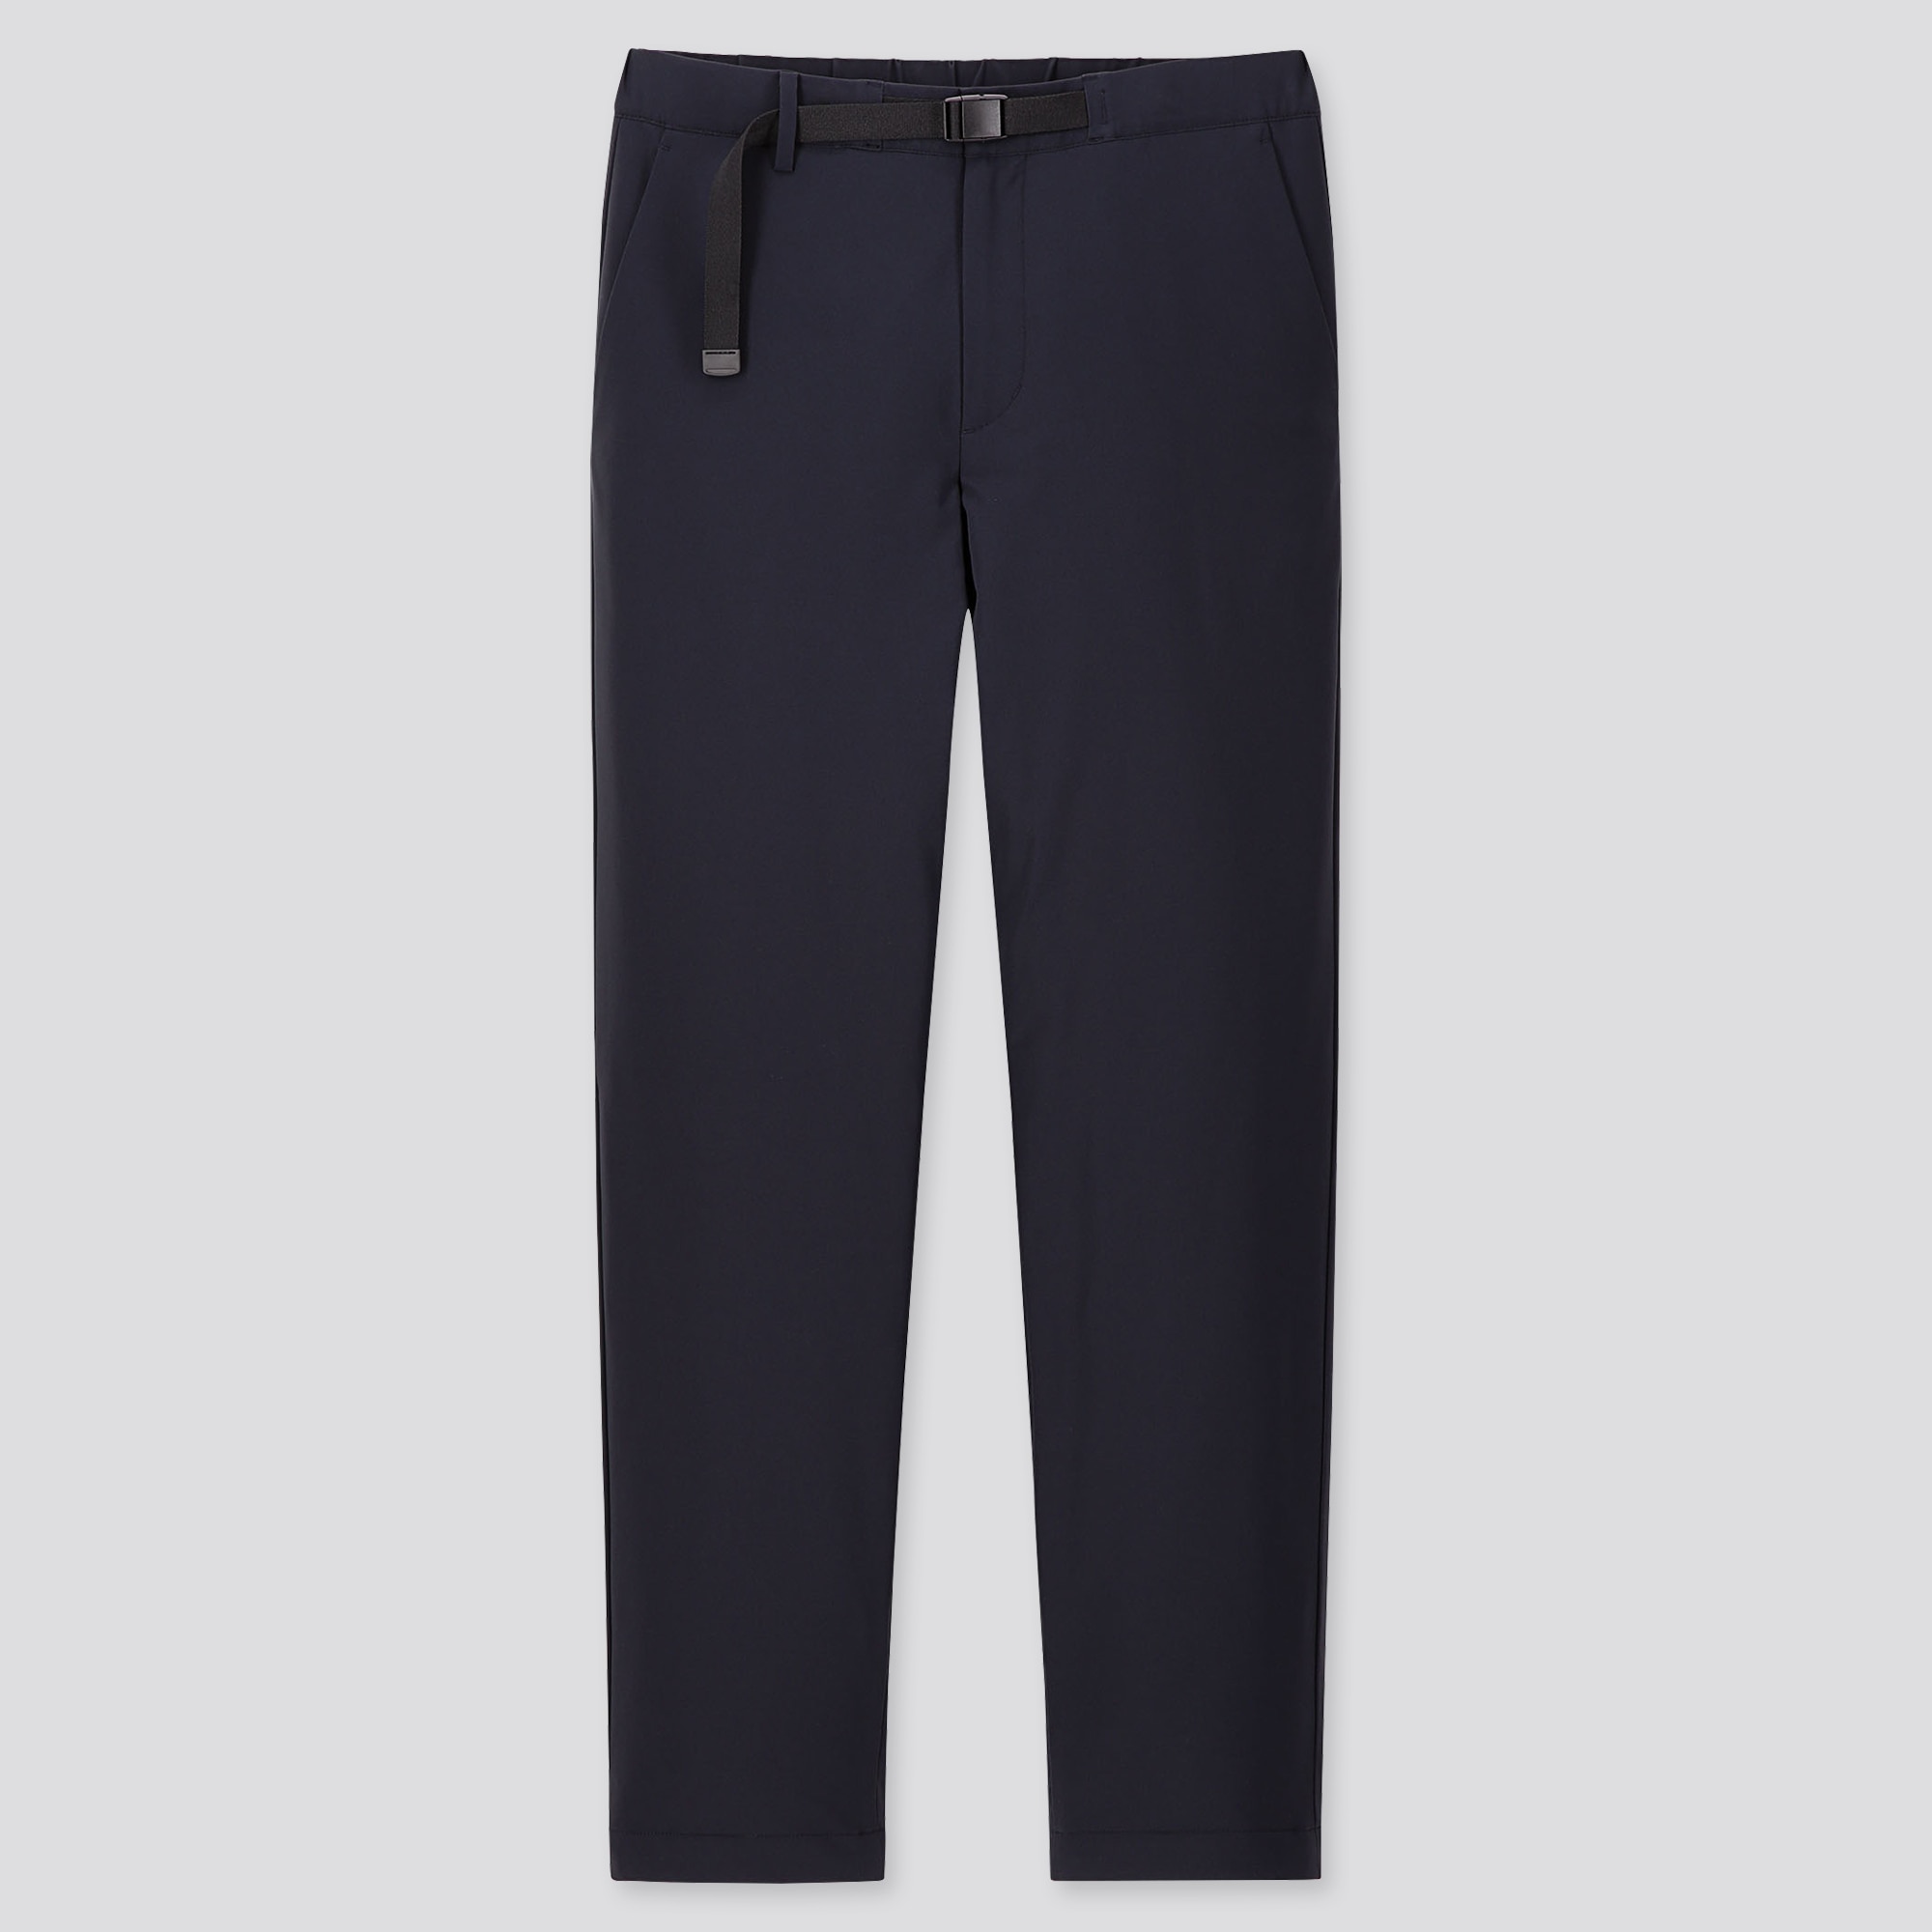 MEN WINDPROOF EXTRA WARM-LINED PANTS 